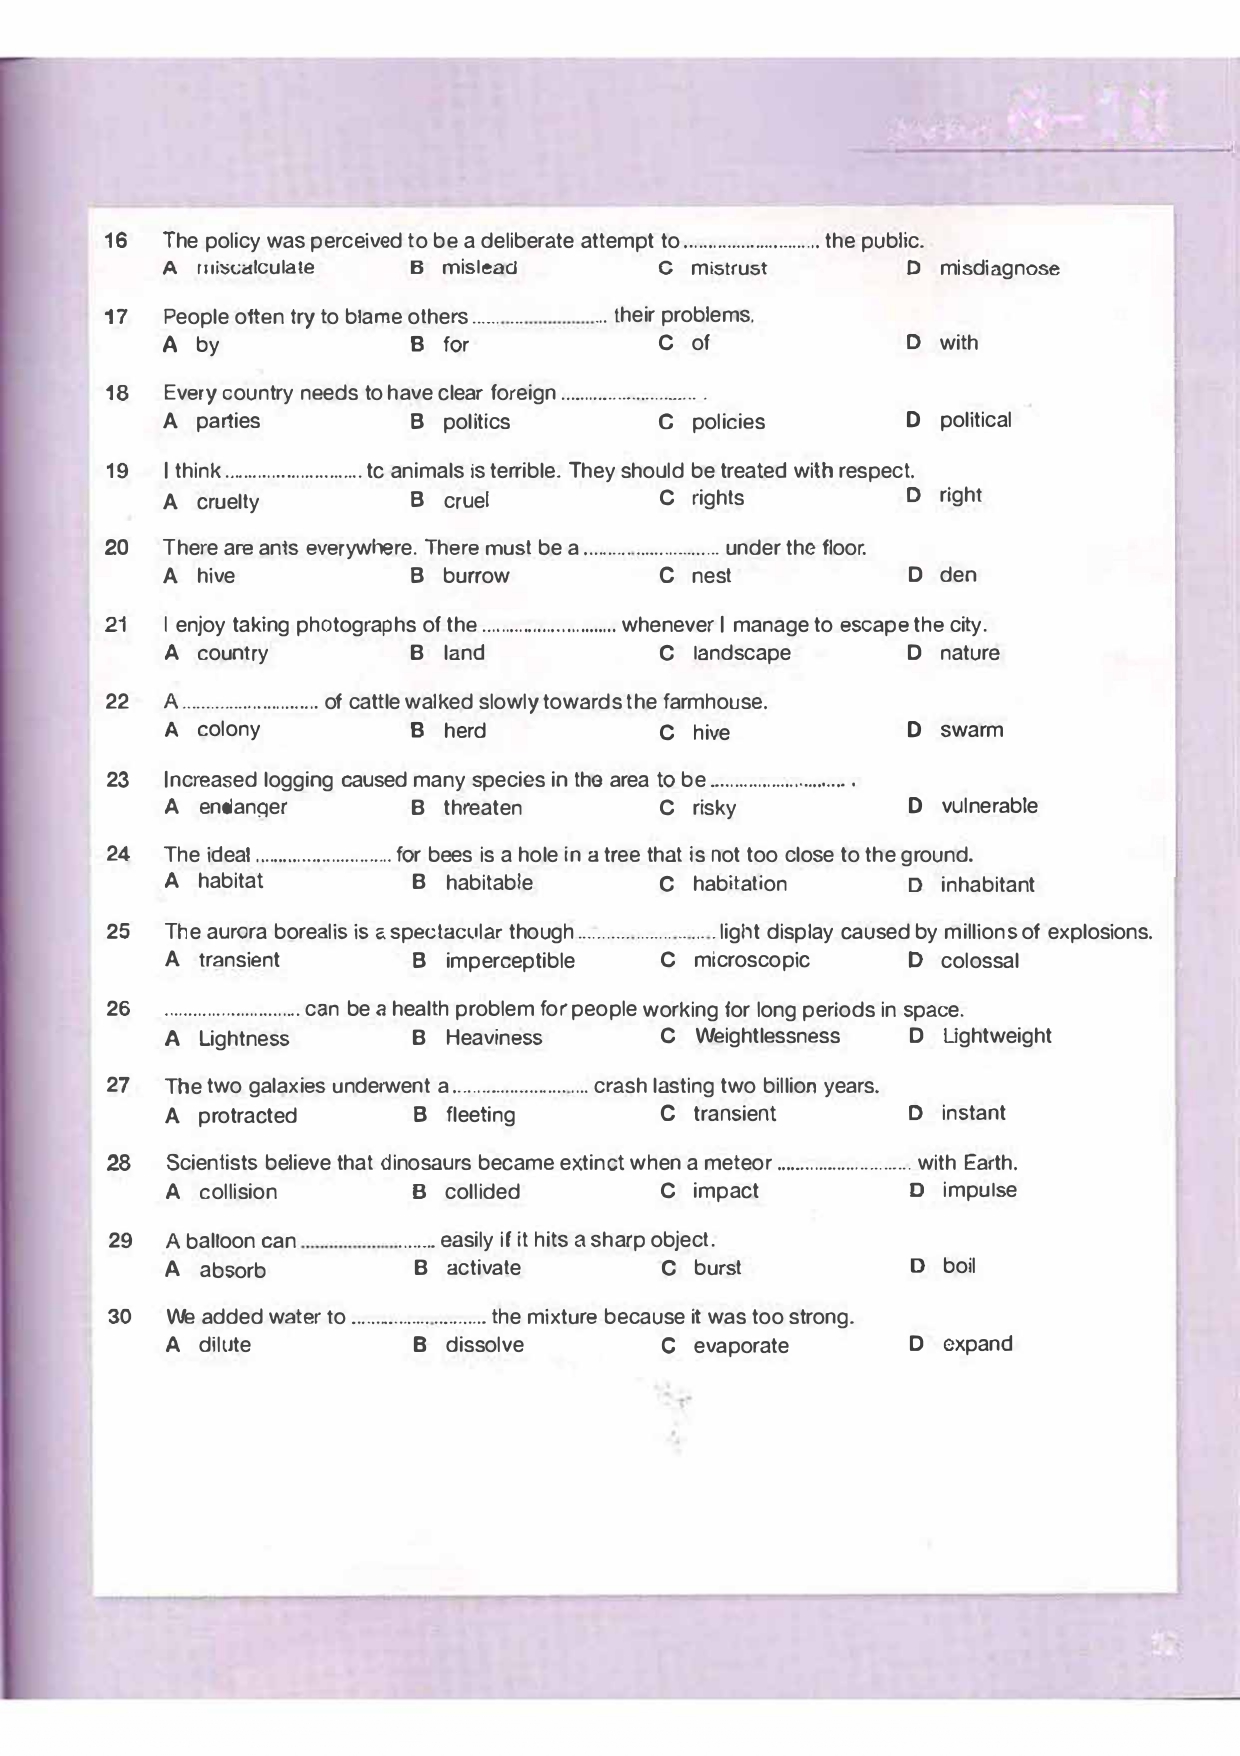 [tailieudieuky.com] Vocabulary tests for gifted students with key (13 pages)_page-0004